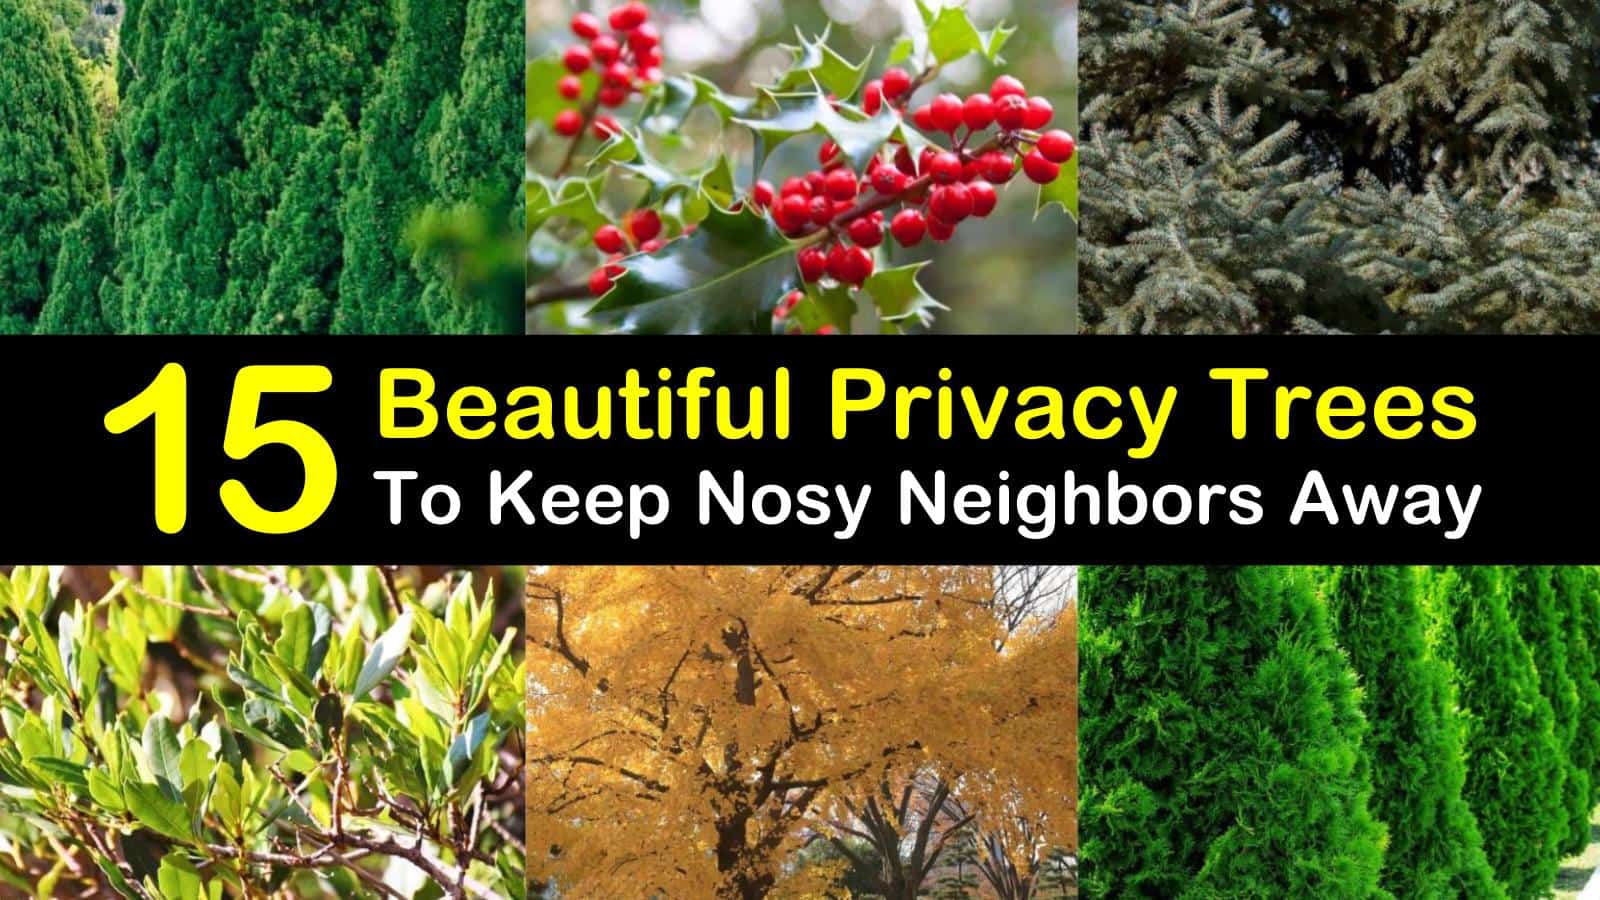 privacy trees titleimg1